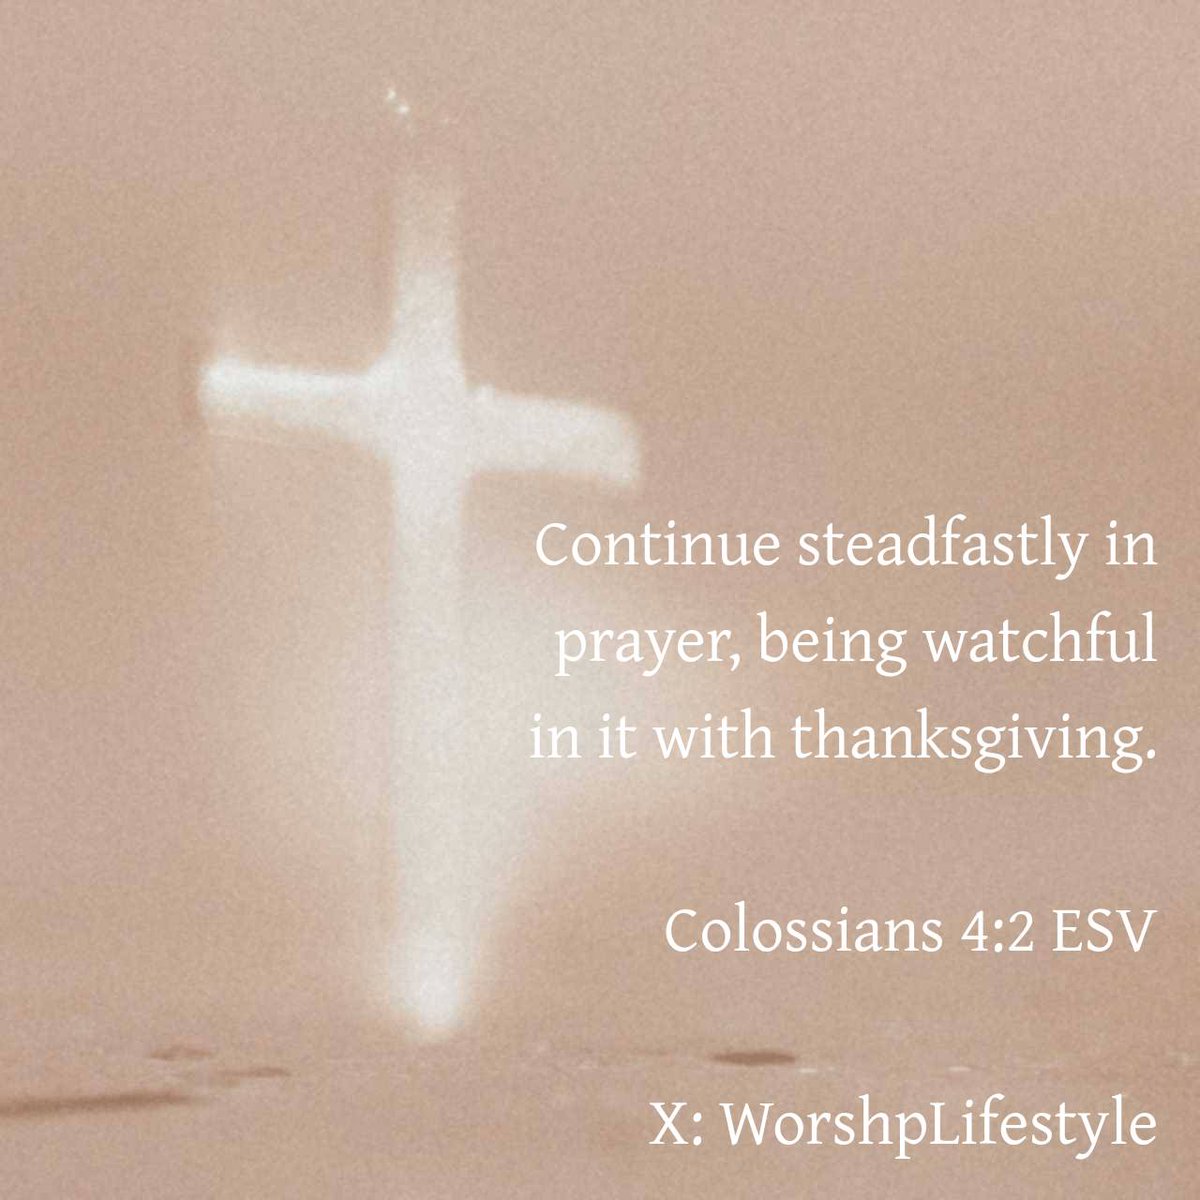 Colossians 4:2 ESV
Continue steadfastly in prayer, being watchful in it with thanksgiving. 

bible.com/bible/59/col.4…
#VerseOfTheDay #BibleVerse #WorshpLifestyle #WorshipLifestyle